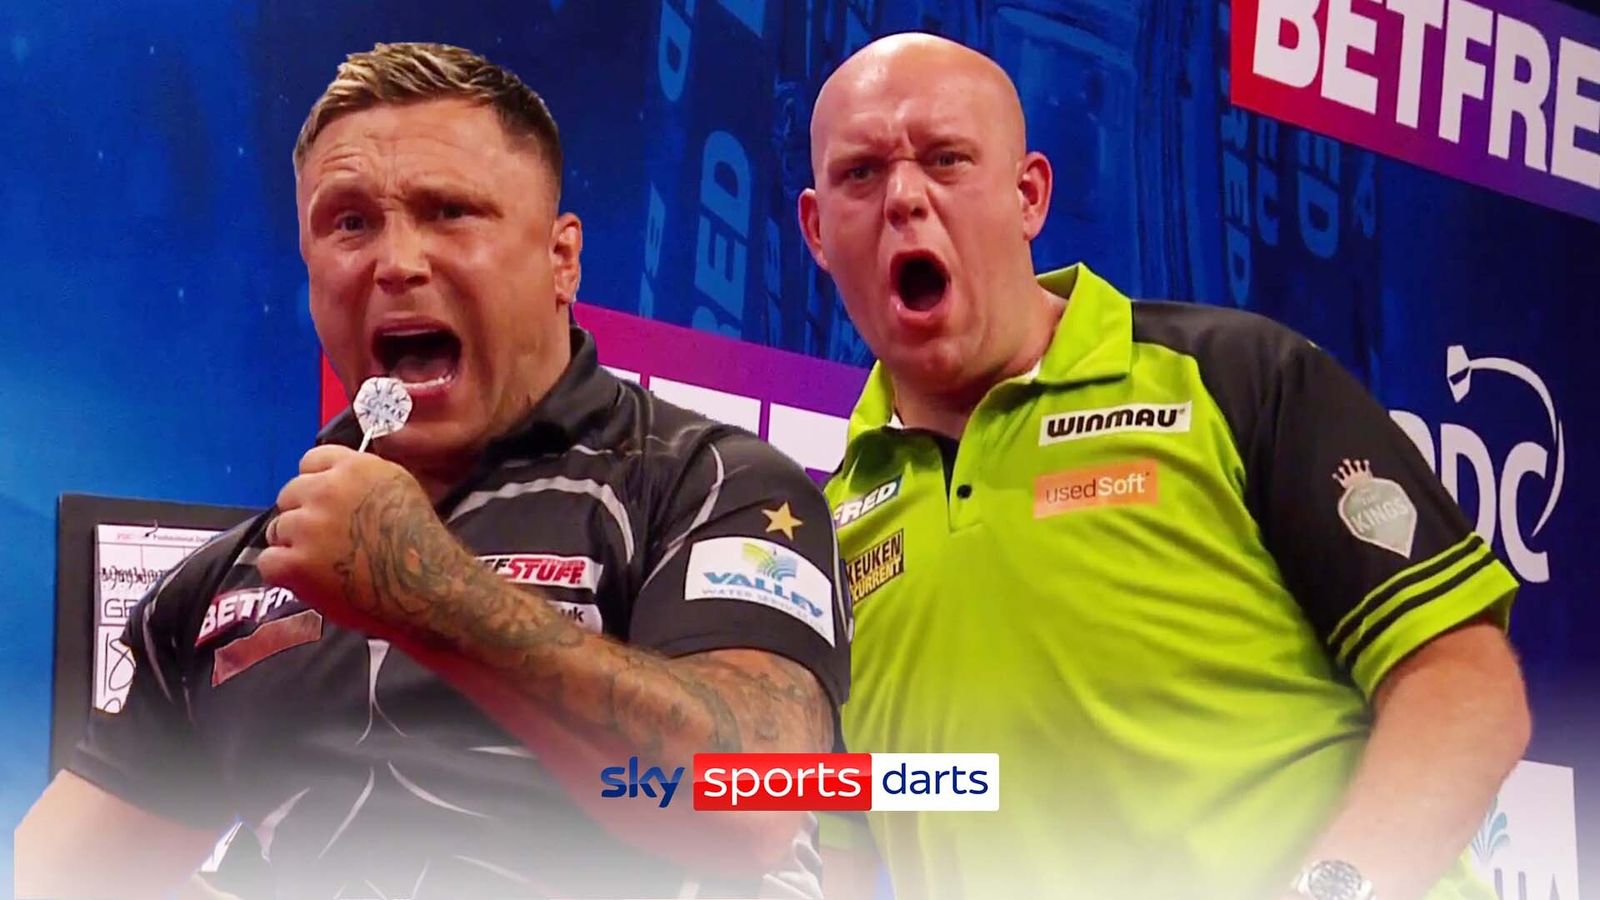 World Darts Championship: Michael van Gerwen and Gerwyn Price to reach final | World number one will ‘have to play better’